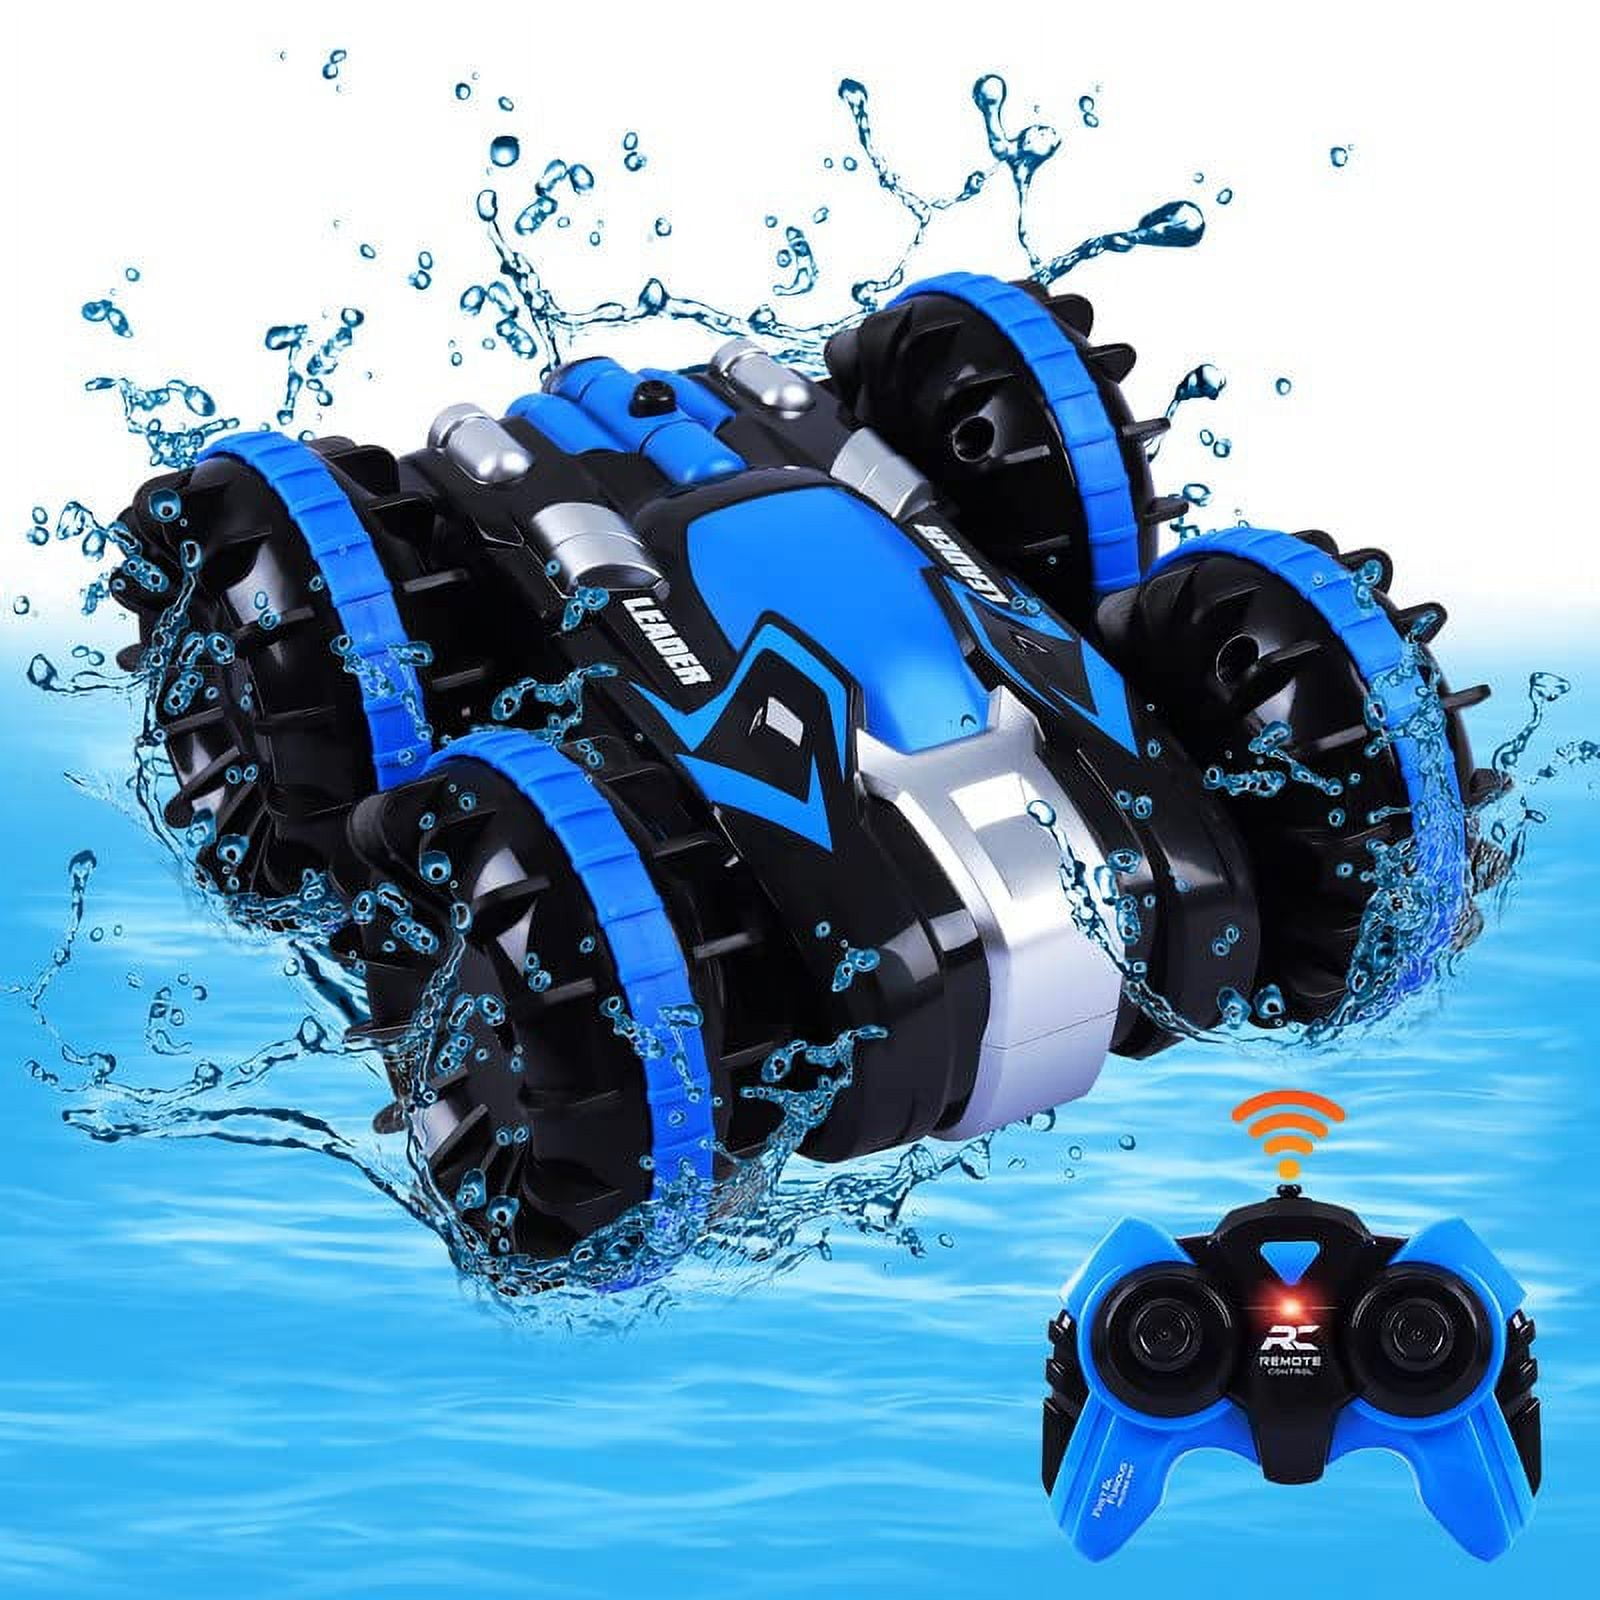 rc boat surfer, rc boat surfer Suppliers and Manufacturers at